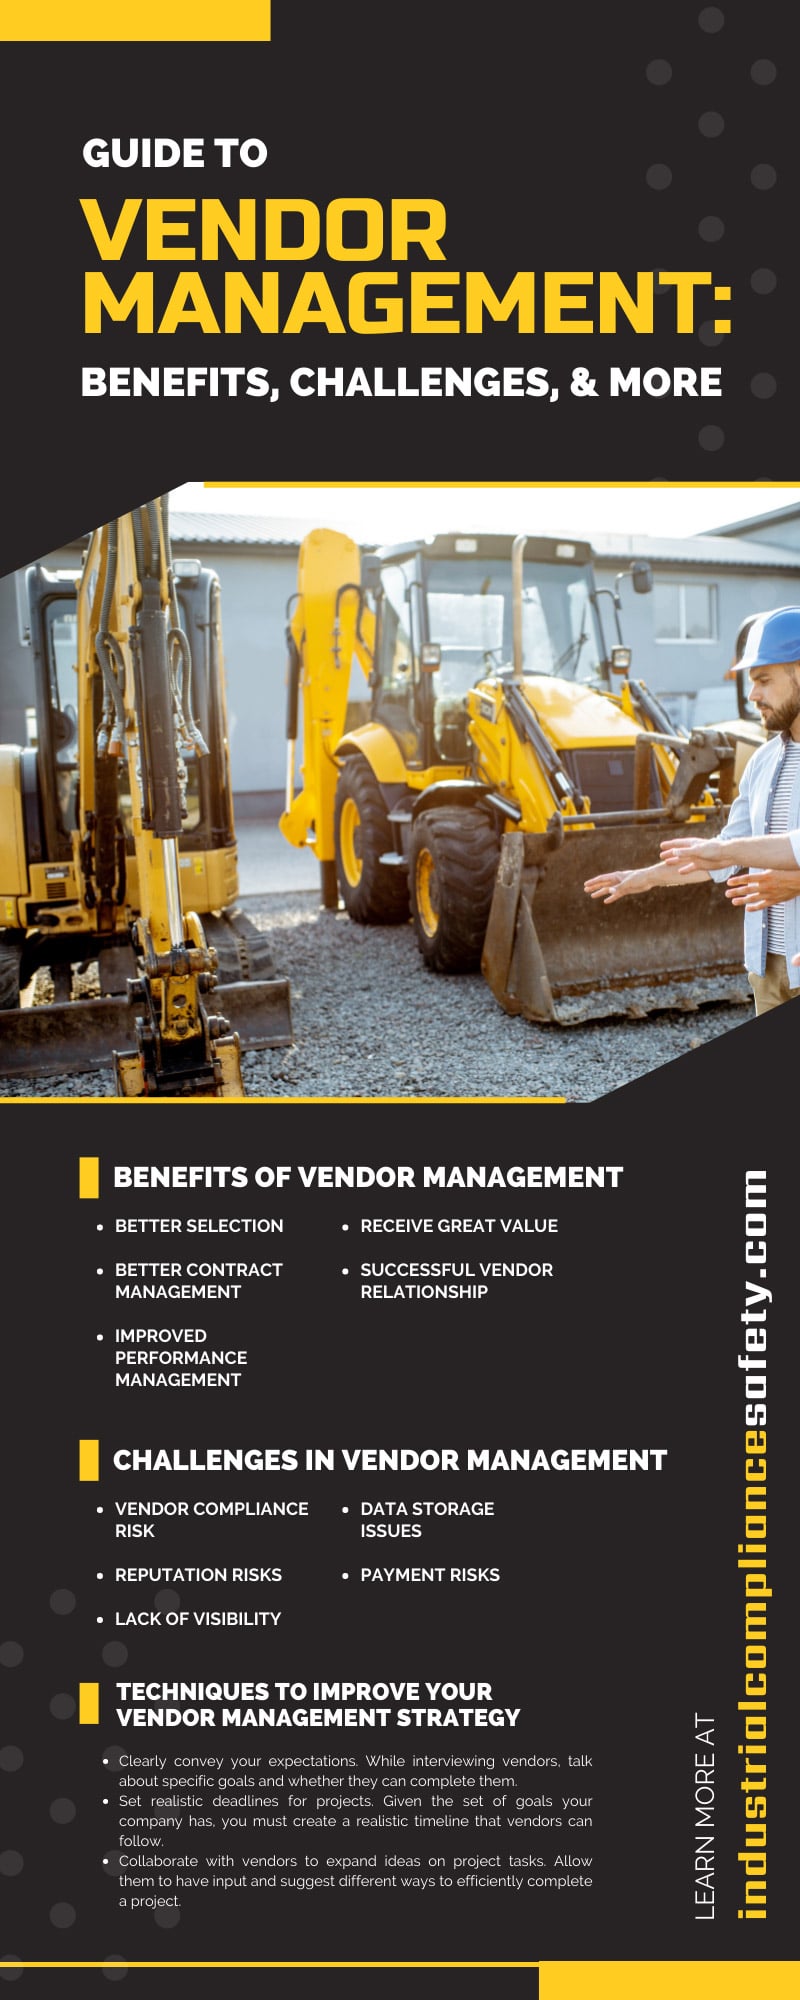 Guide To Vendor Management: Benefits, Challenges, & More